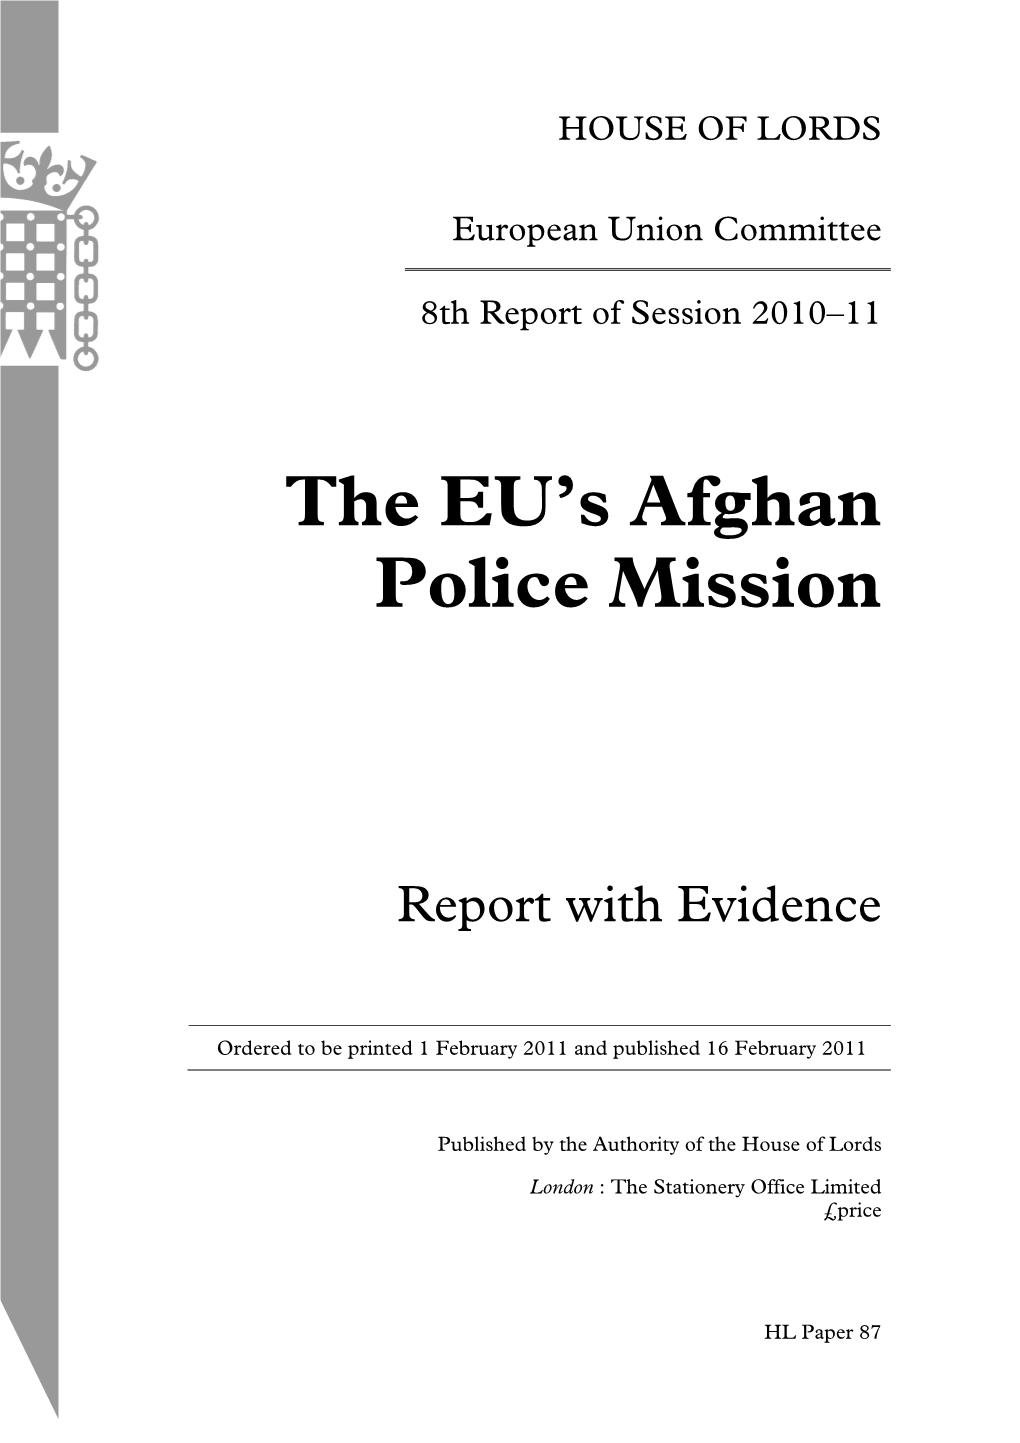 The Eu's Afghan Police Mission